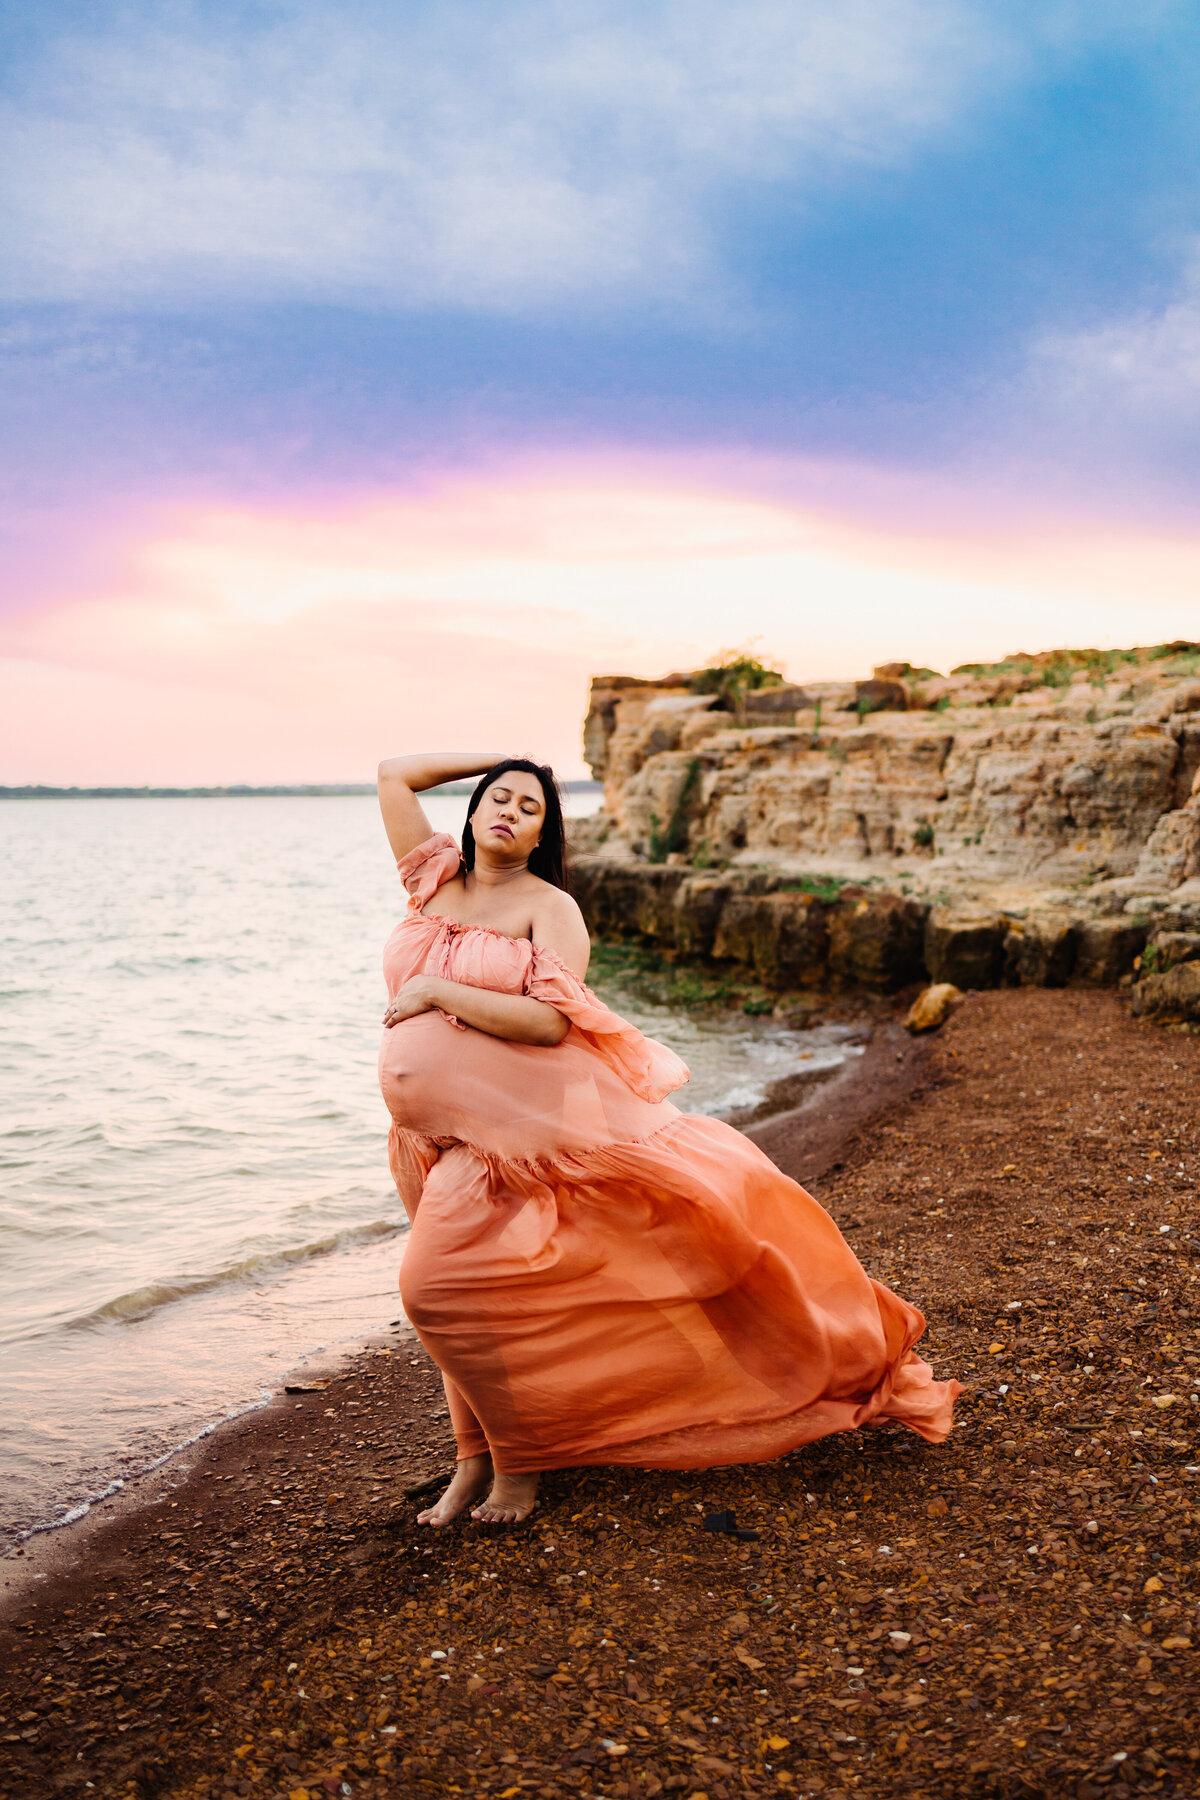 A serene maternity photo of a pregnant woman in an orange dress standing by the sea. With her hand on her head and eyes closed, she embodies tranquility and grace against a backdrop of sand dunes and a clear blue sky.